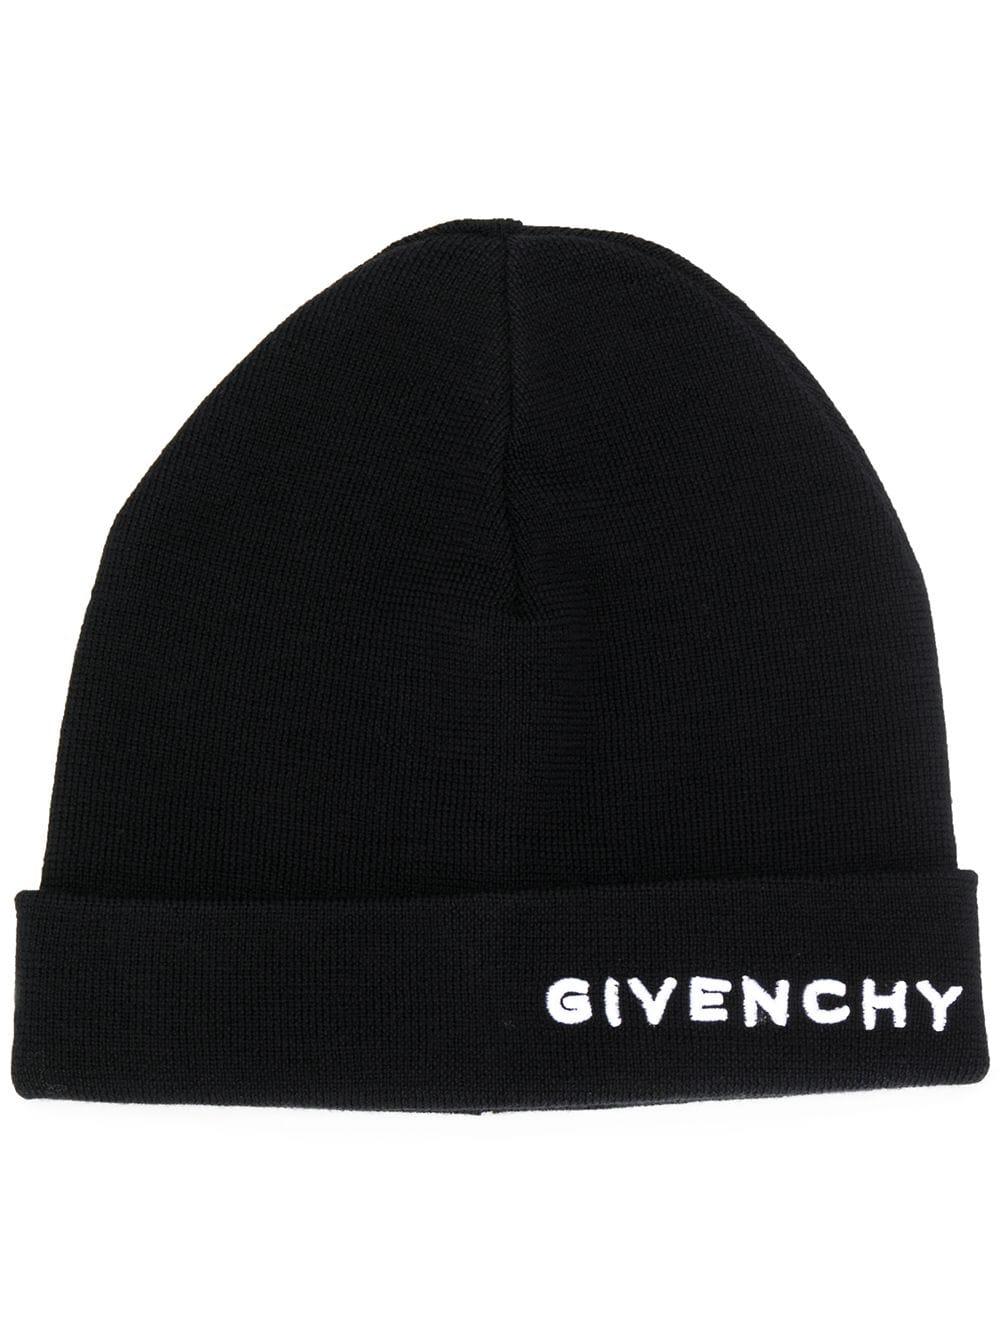 Givenchy Wool Logo Beanie in Black - Save 14% - Lyst